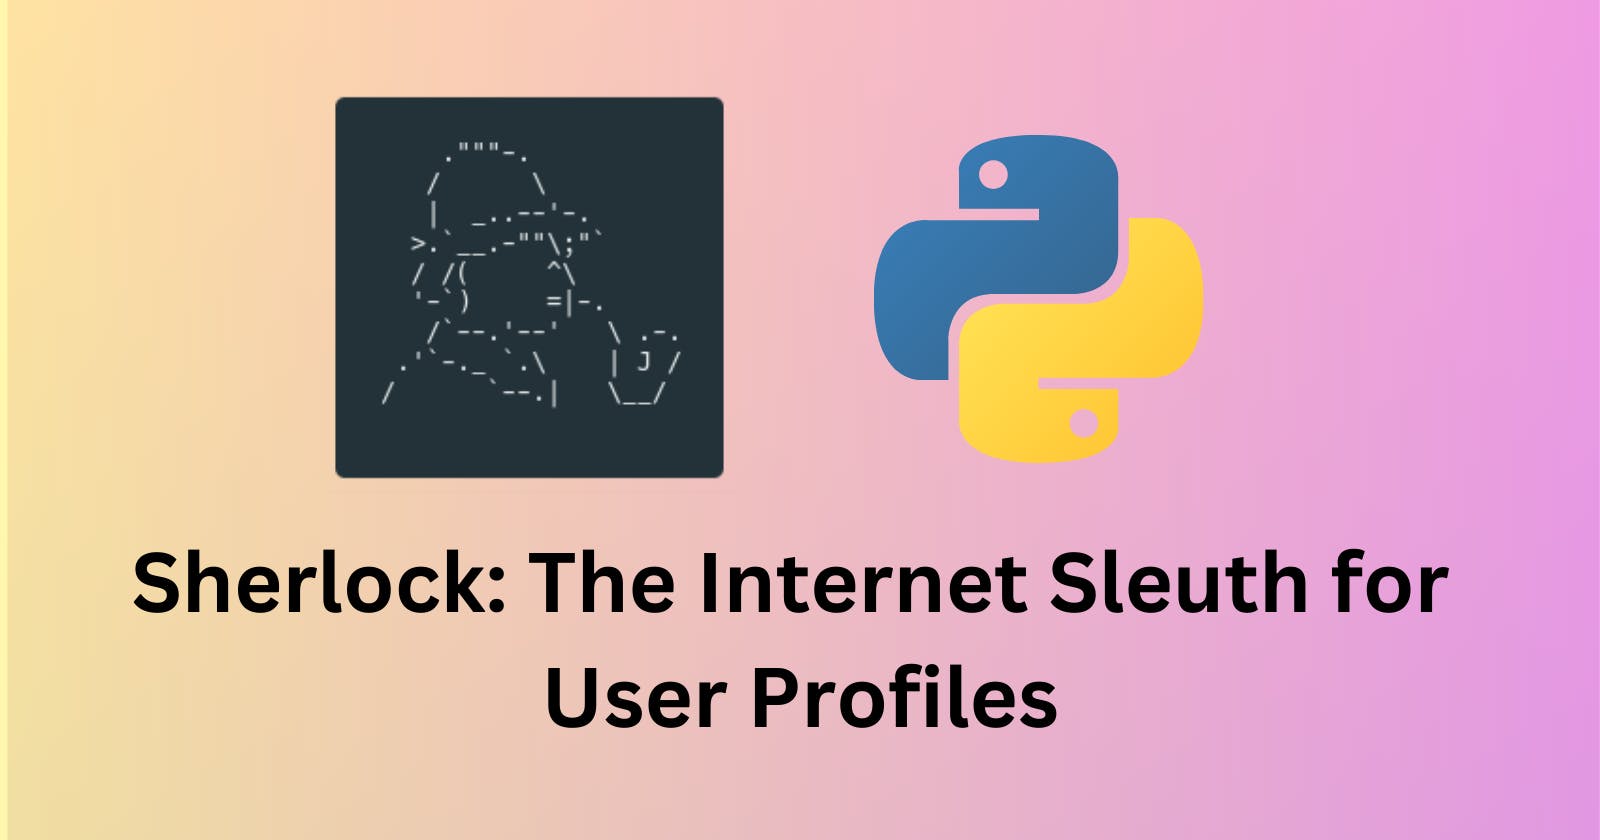 Sherlock: The Internet Sleuth for User Profiles